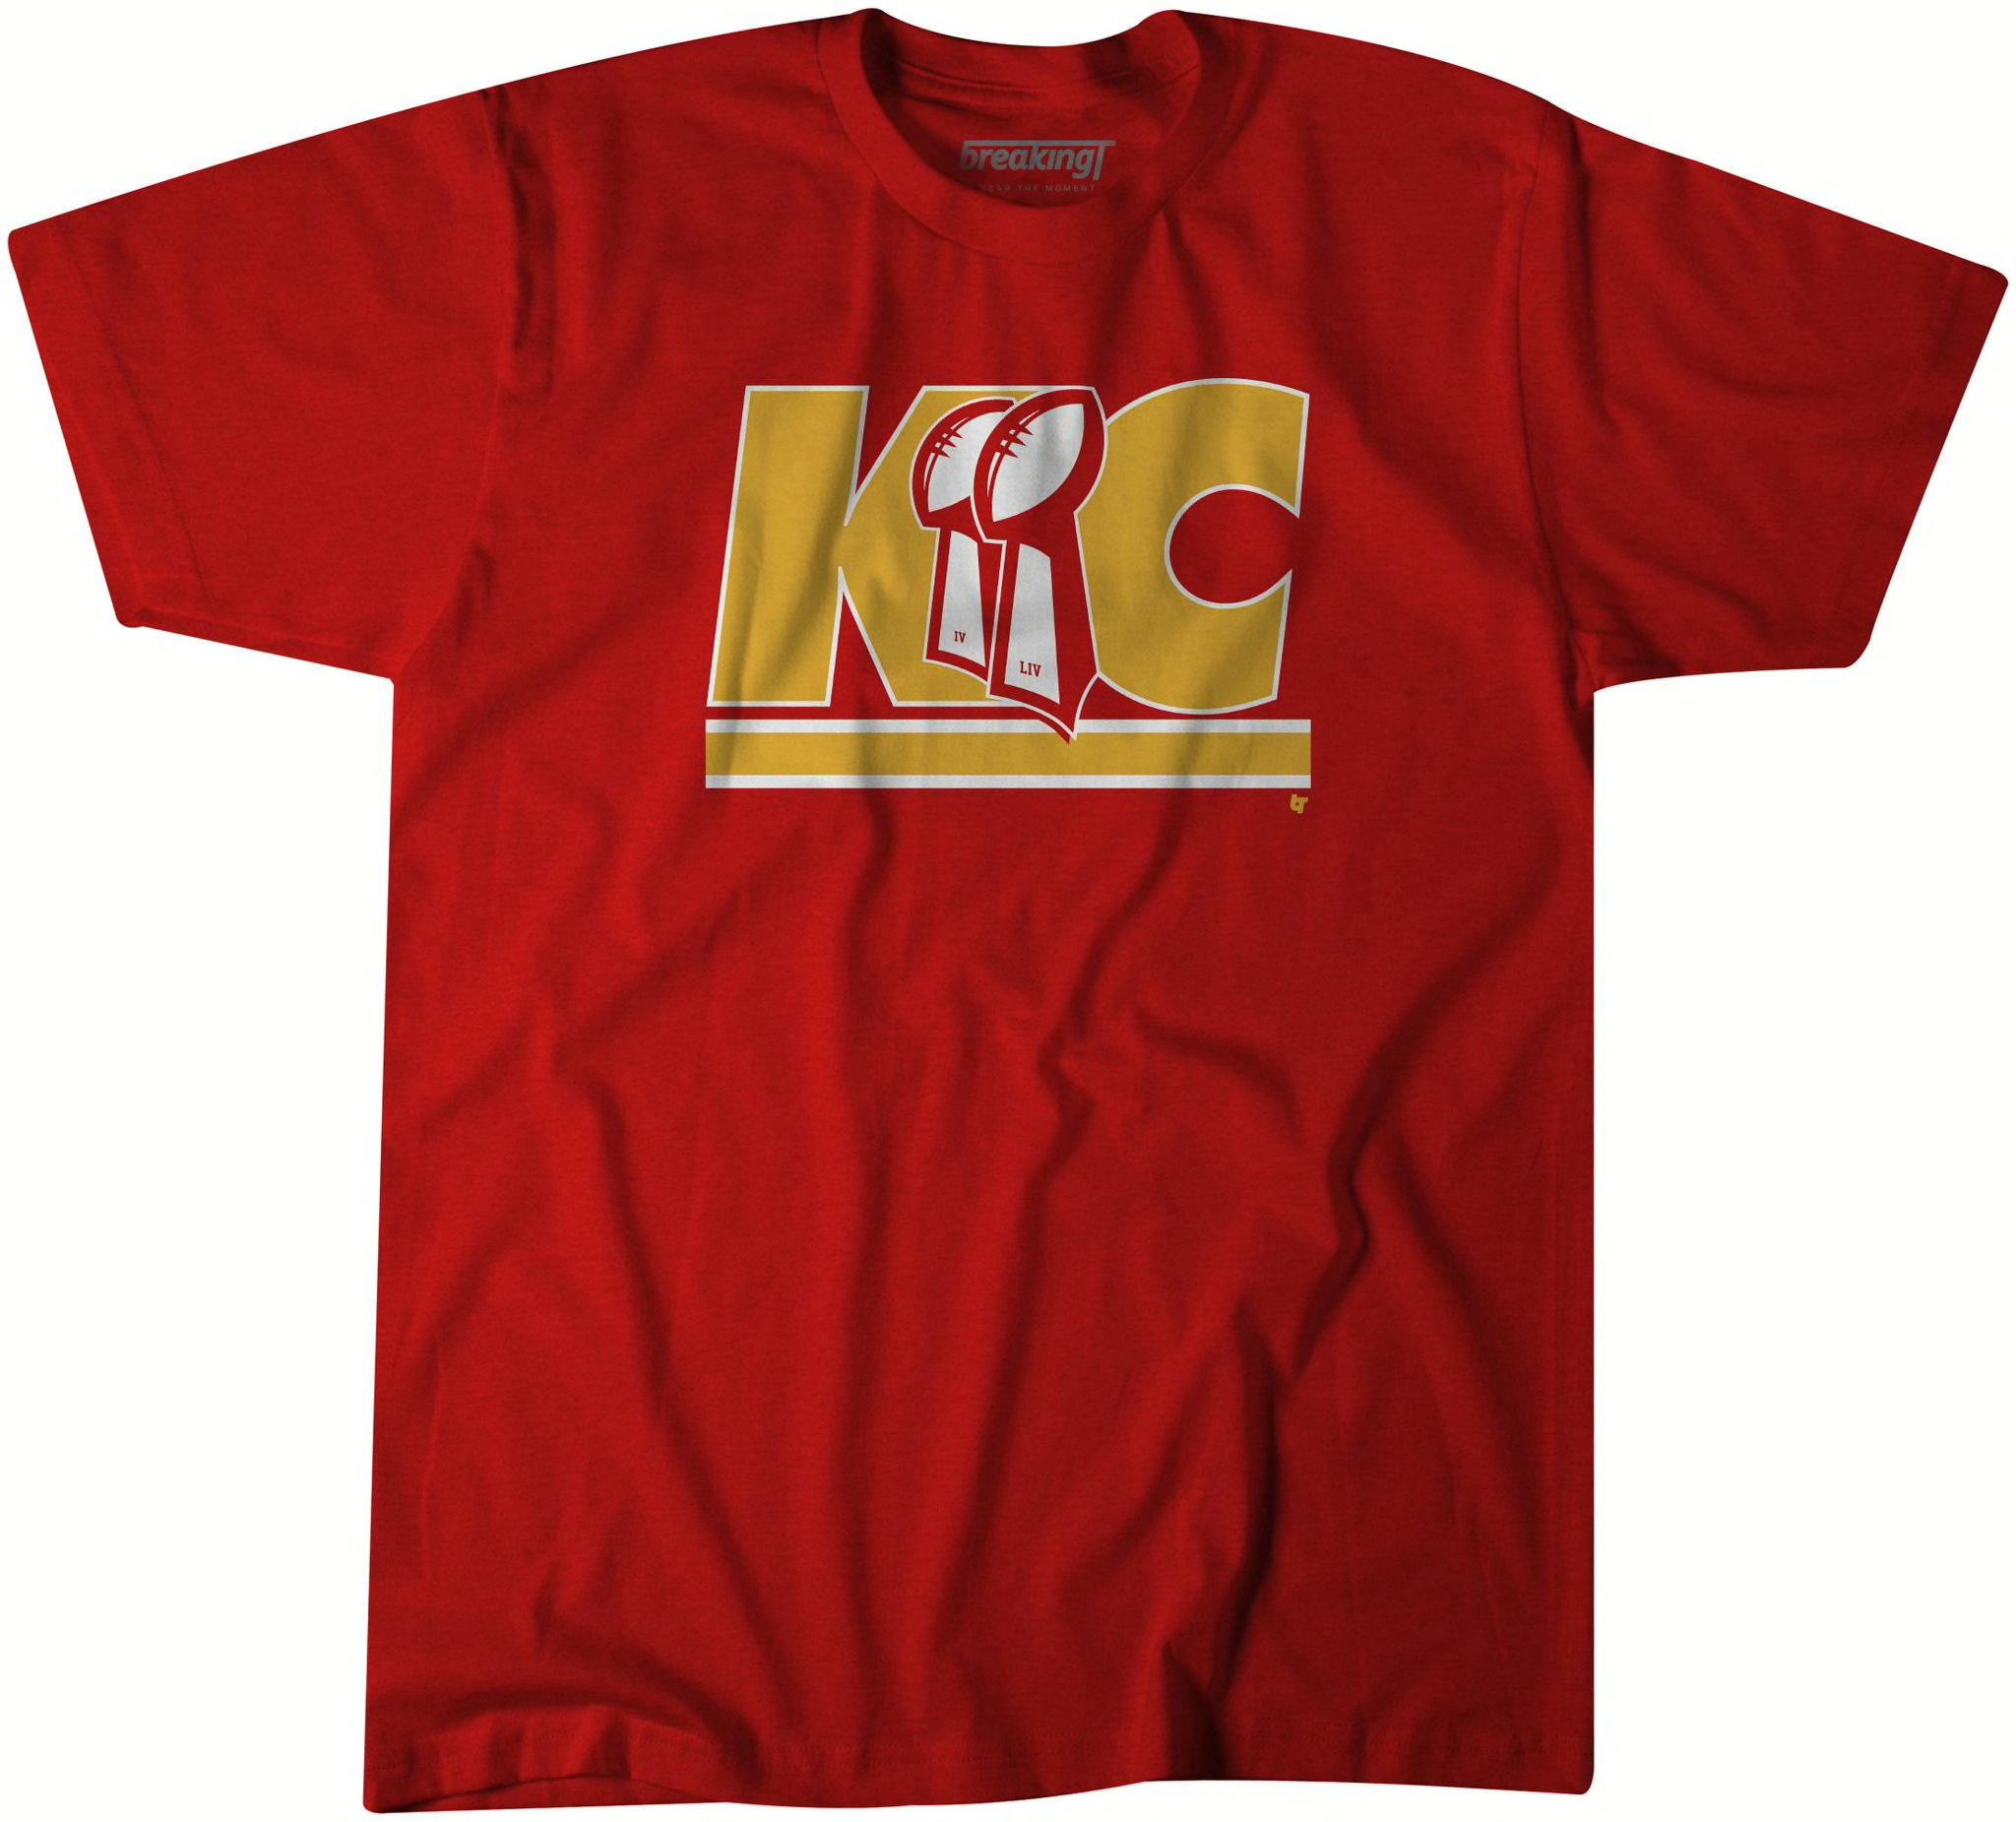 Kansas City fans need to check out BreakingT's Super Bowl Collection